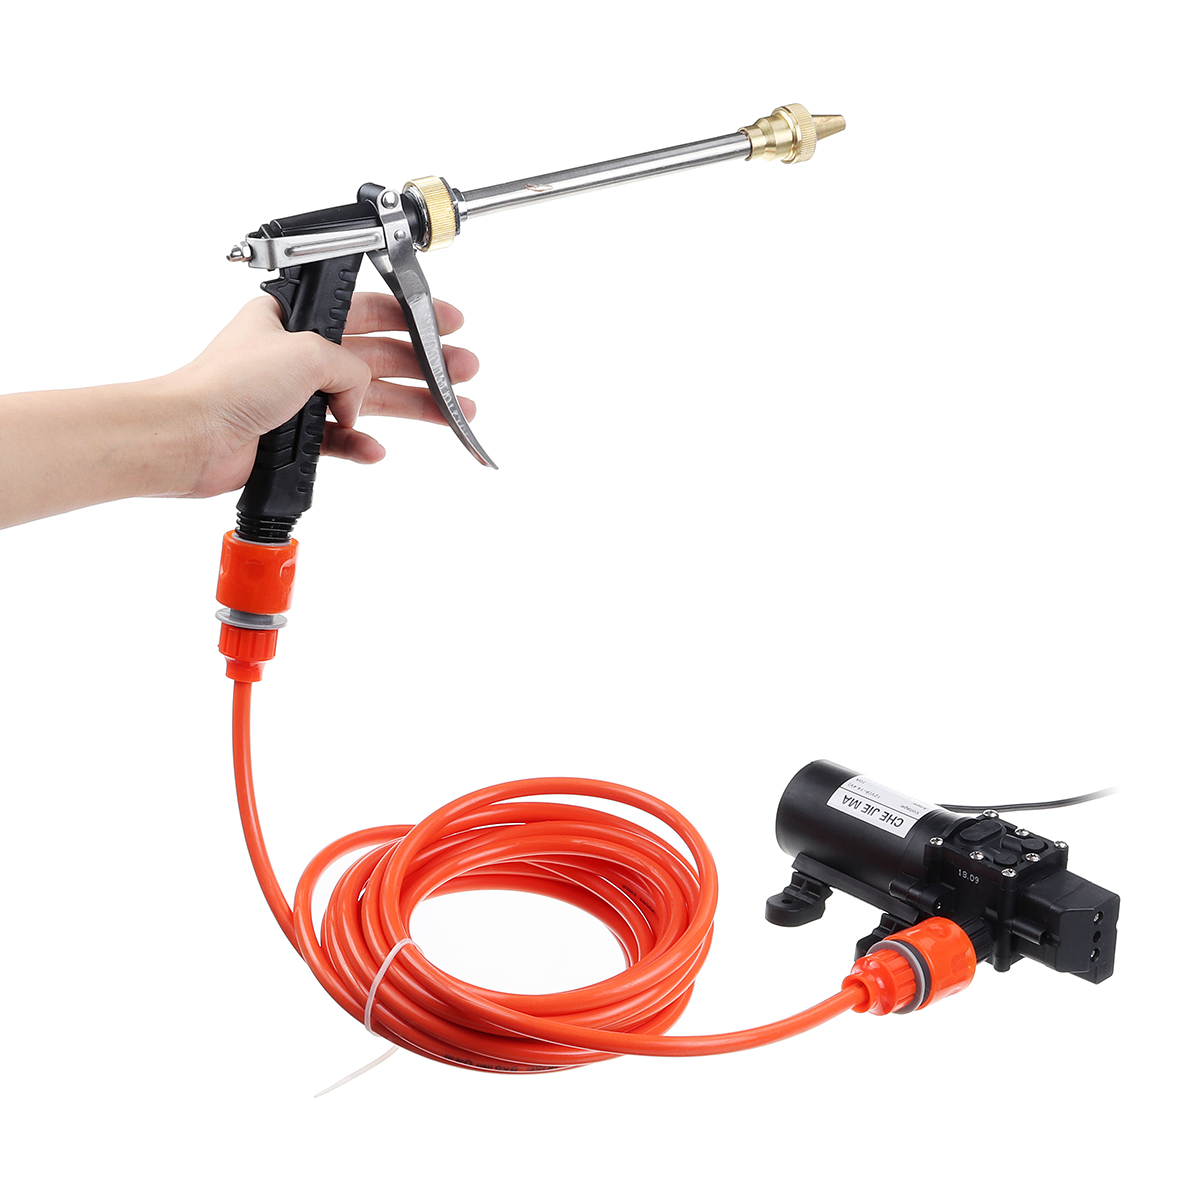 

12v 100W 200PSI Car Wash Pump Sprayer Kit Tool High Pressure Self-Priming Auto Washer Sprayer Cleaning Set with Spray G-un Pipe